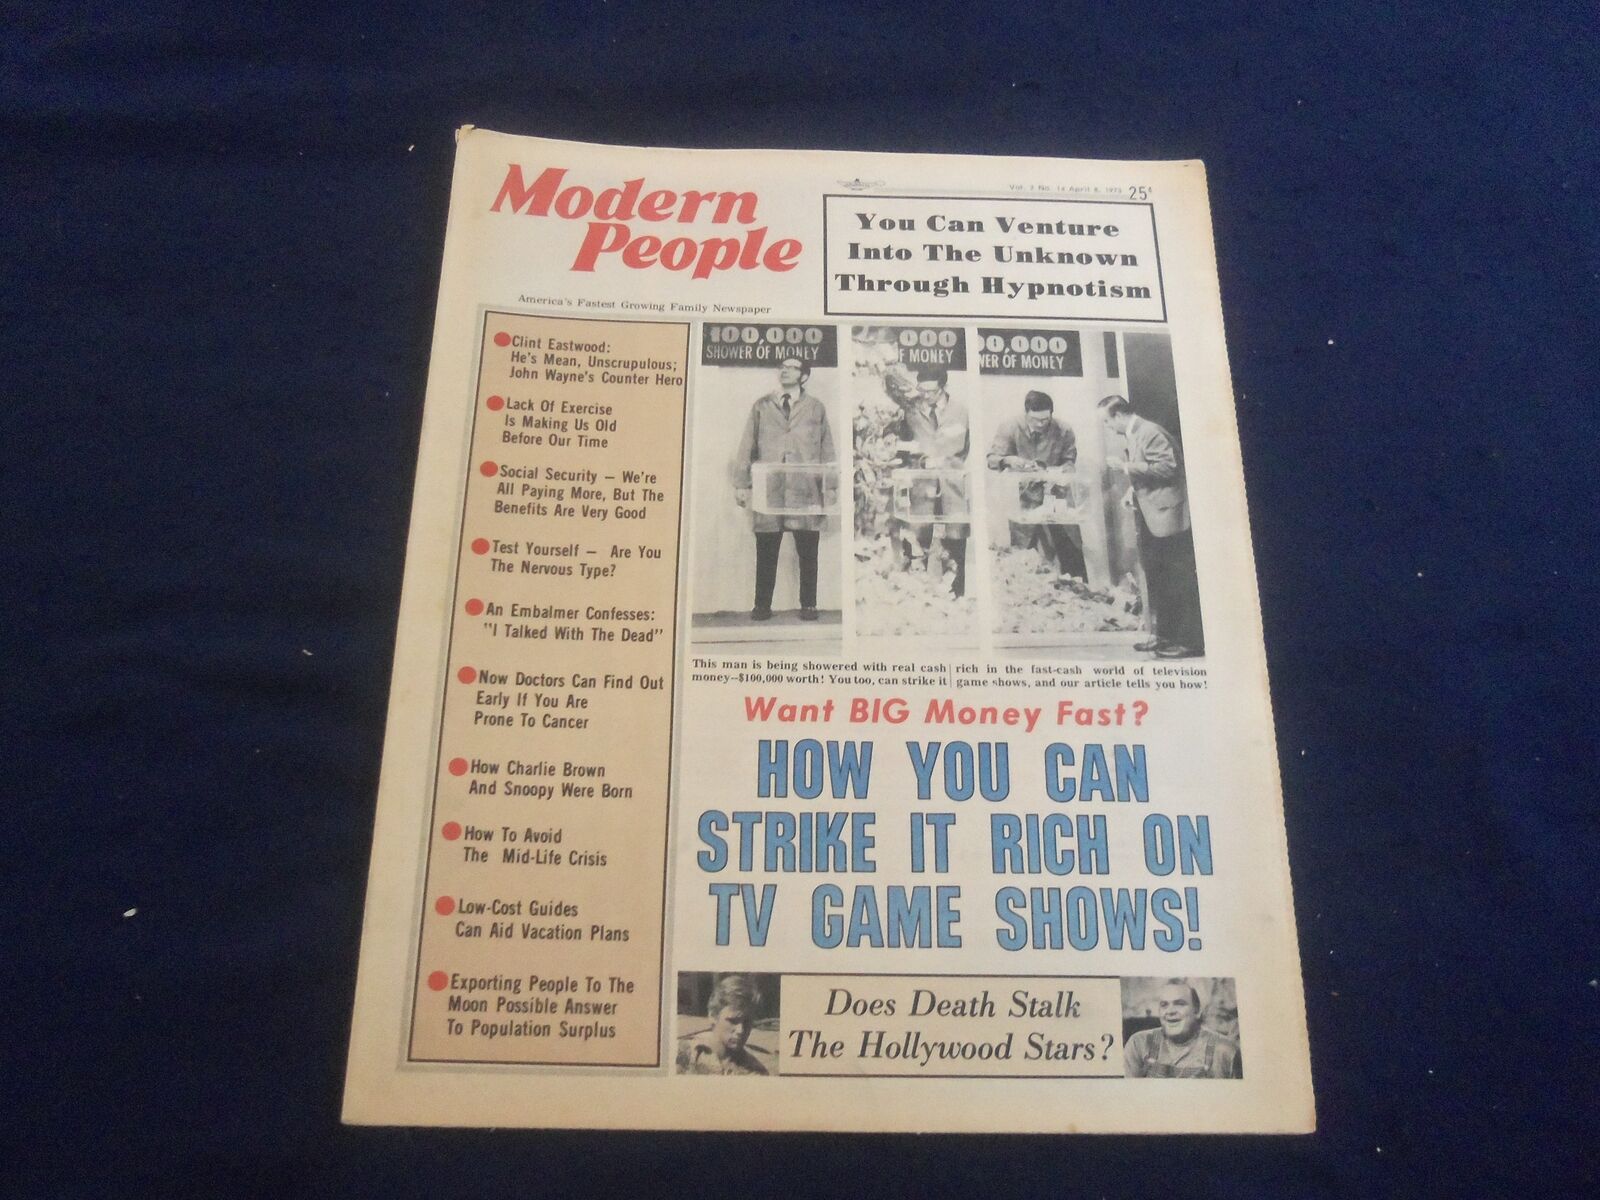 1973 APRIL 8 MODERN PEOPLE NEWSPAPER - STRIKE IT RICH ON TV GAME SHOWS - NP 5674